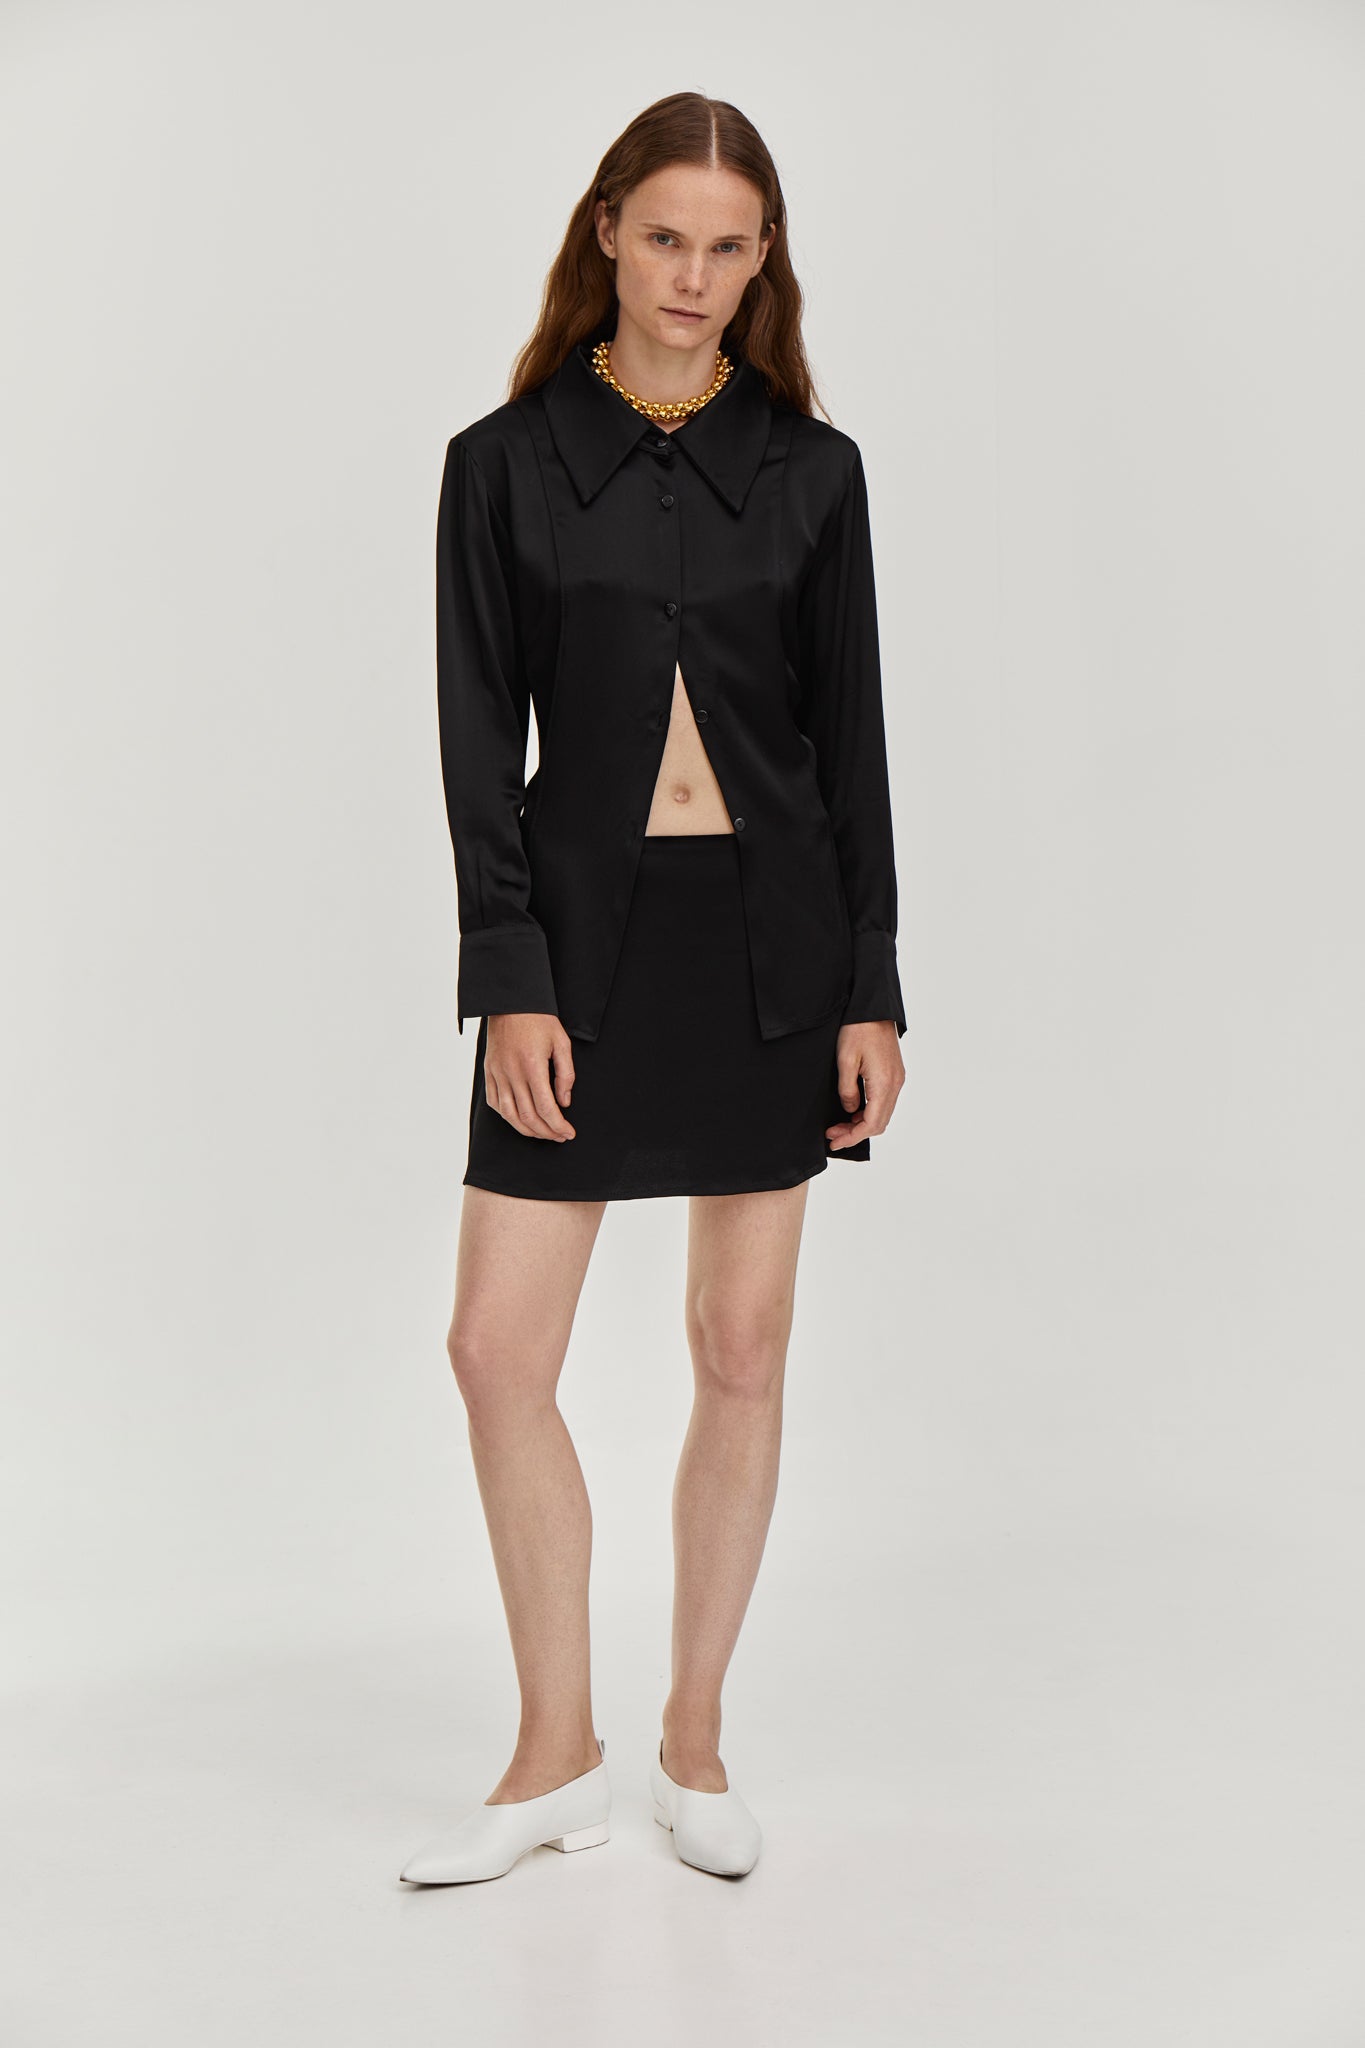 Viscose suit shirt and low-waist silky skirt in black color from FORMA.